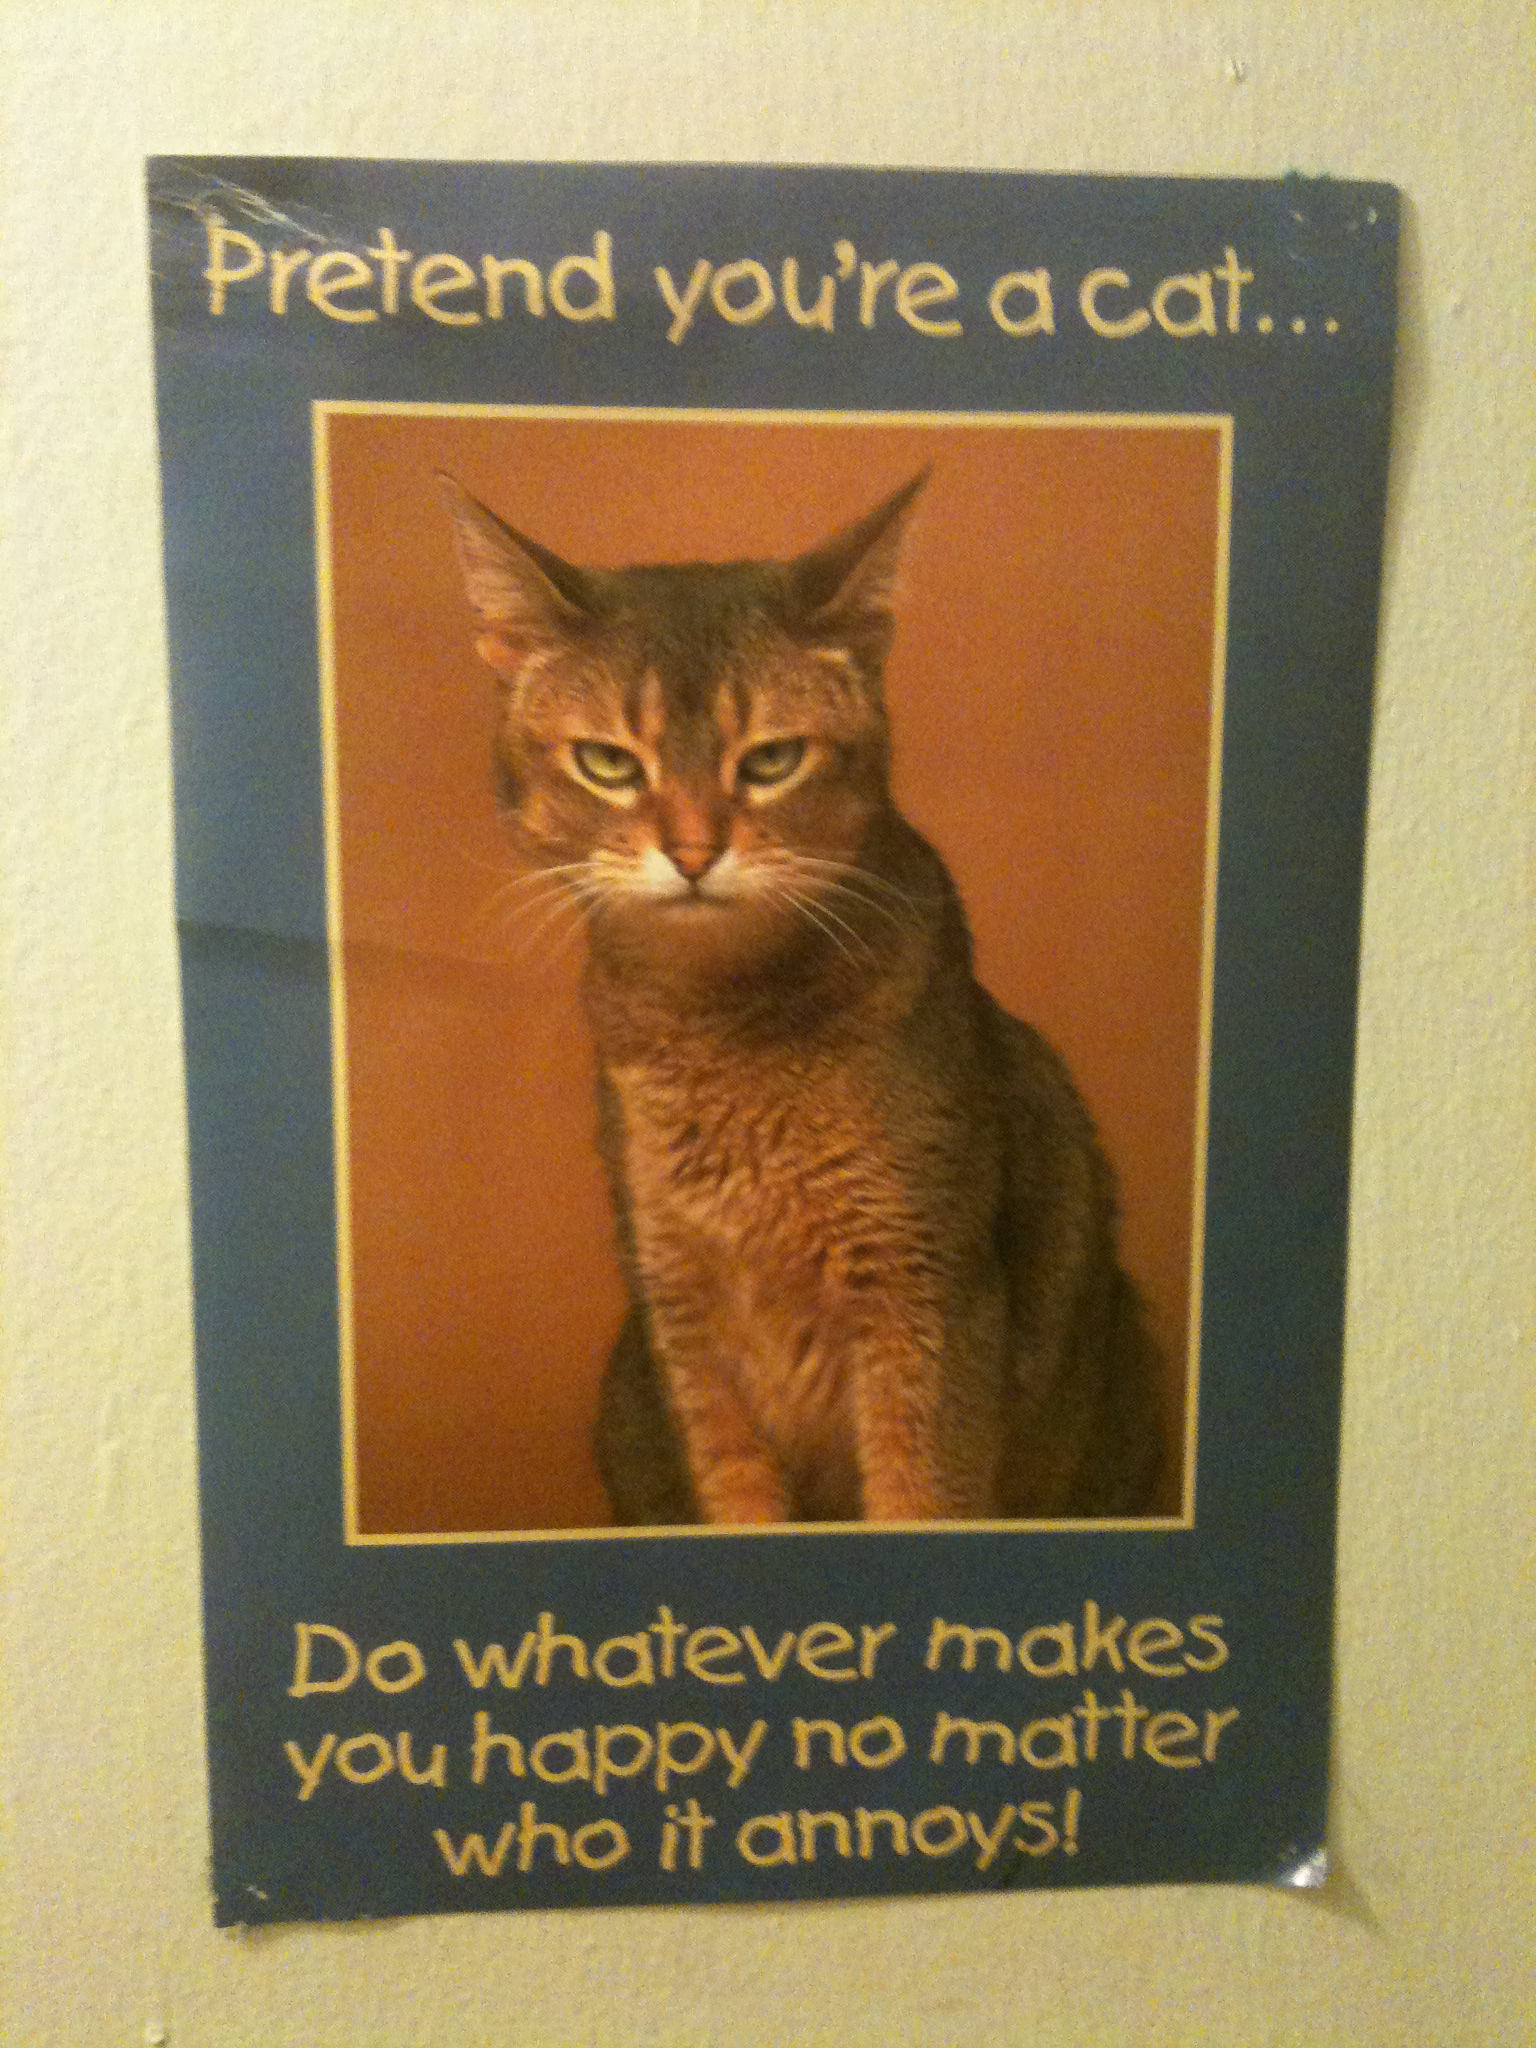 This is on the closet door just to the left of the cat wall.